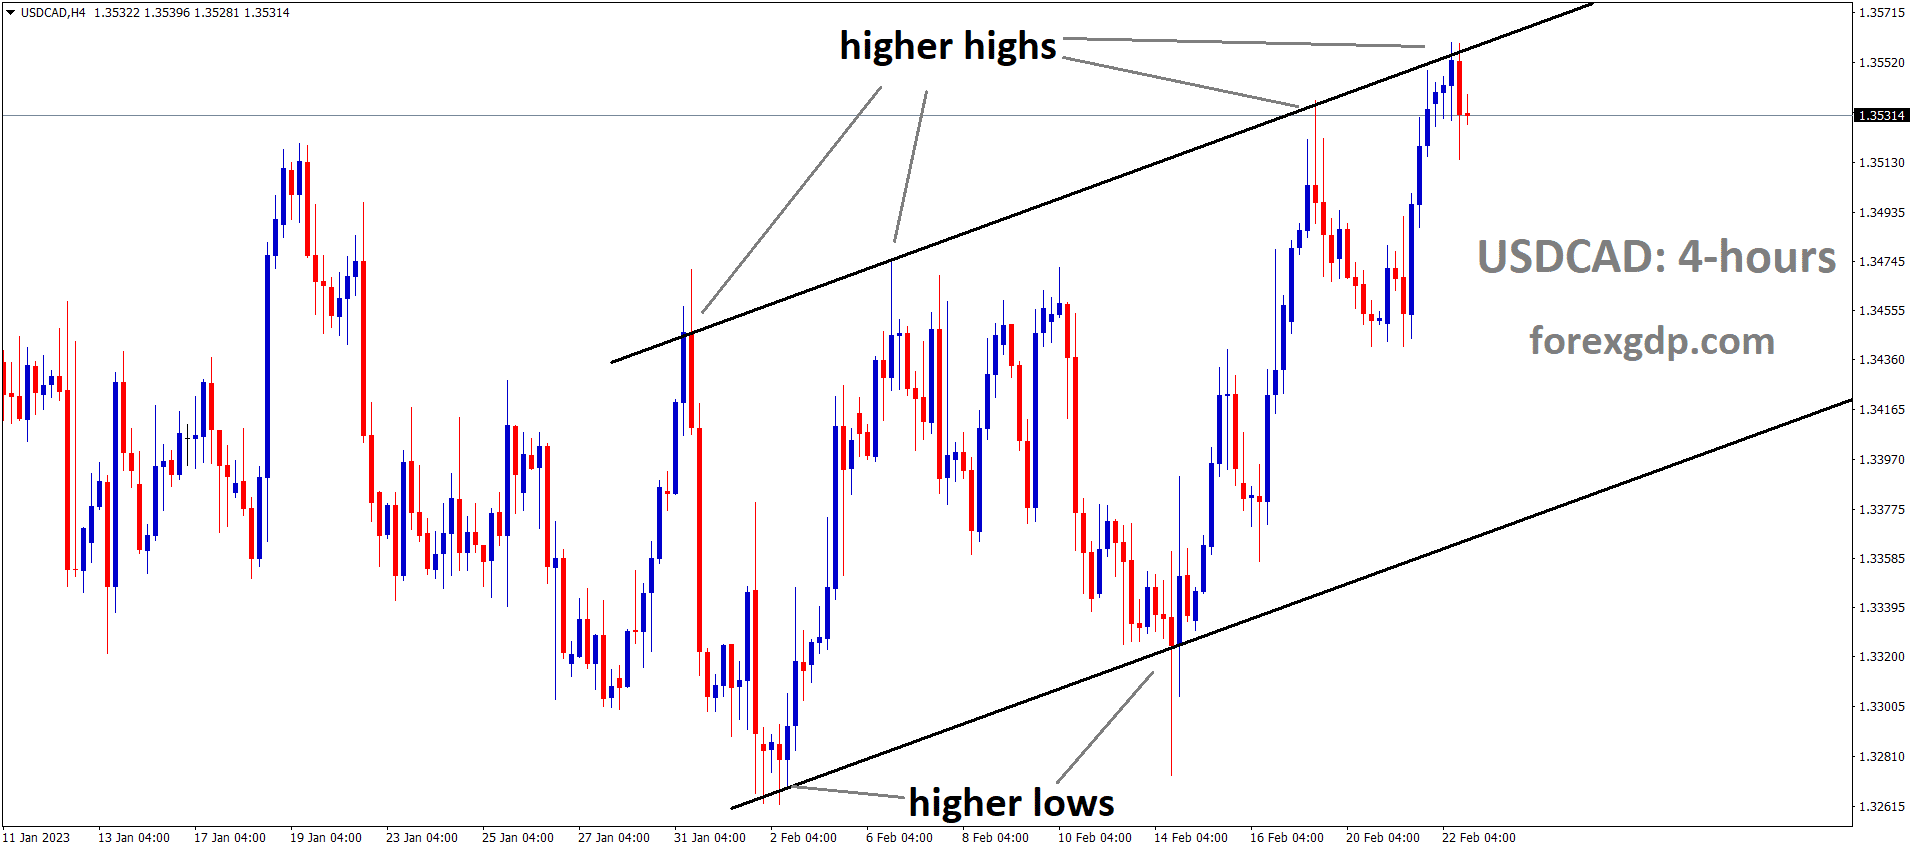 USDCAD is moving in an Ascending channel and the market has reached the higher high area of the channel